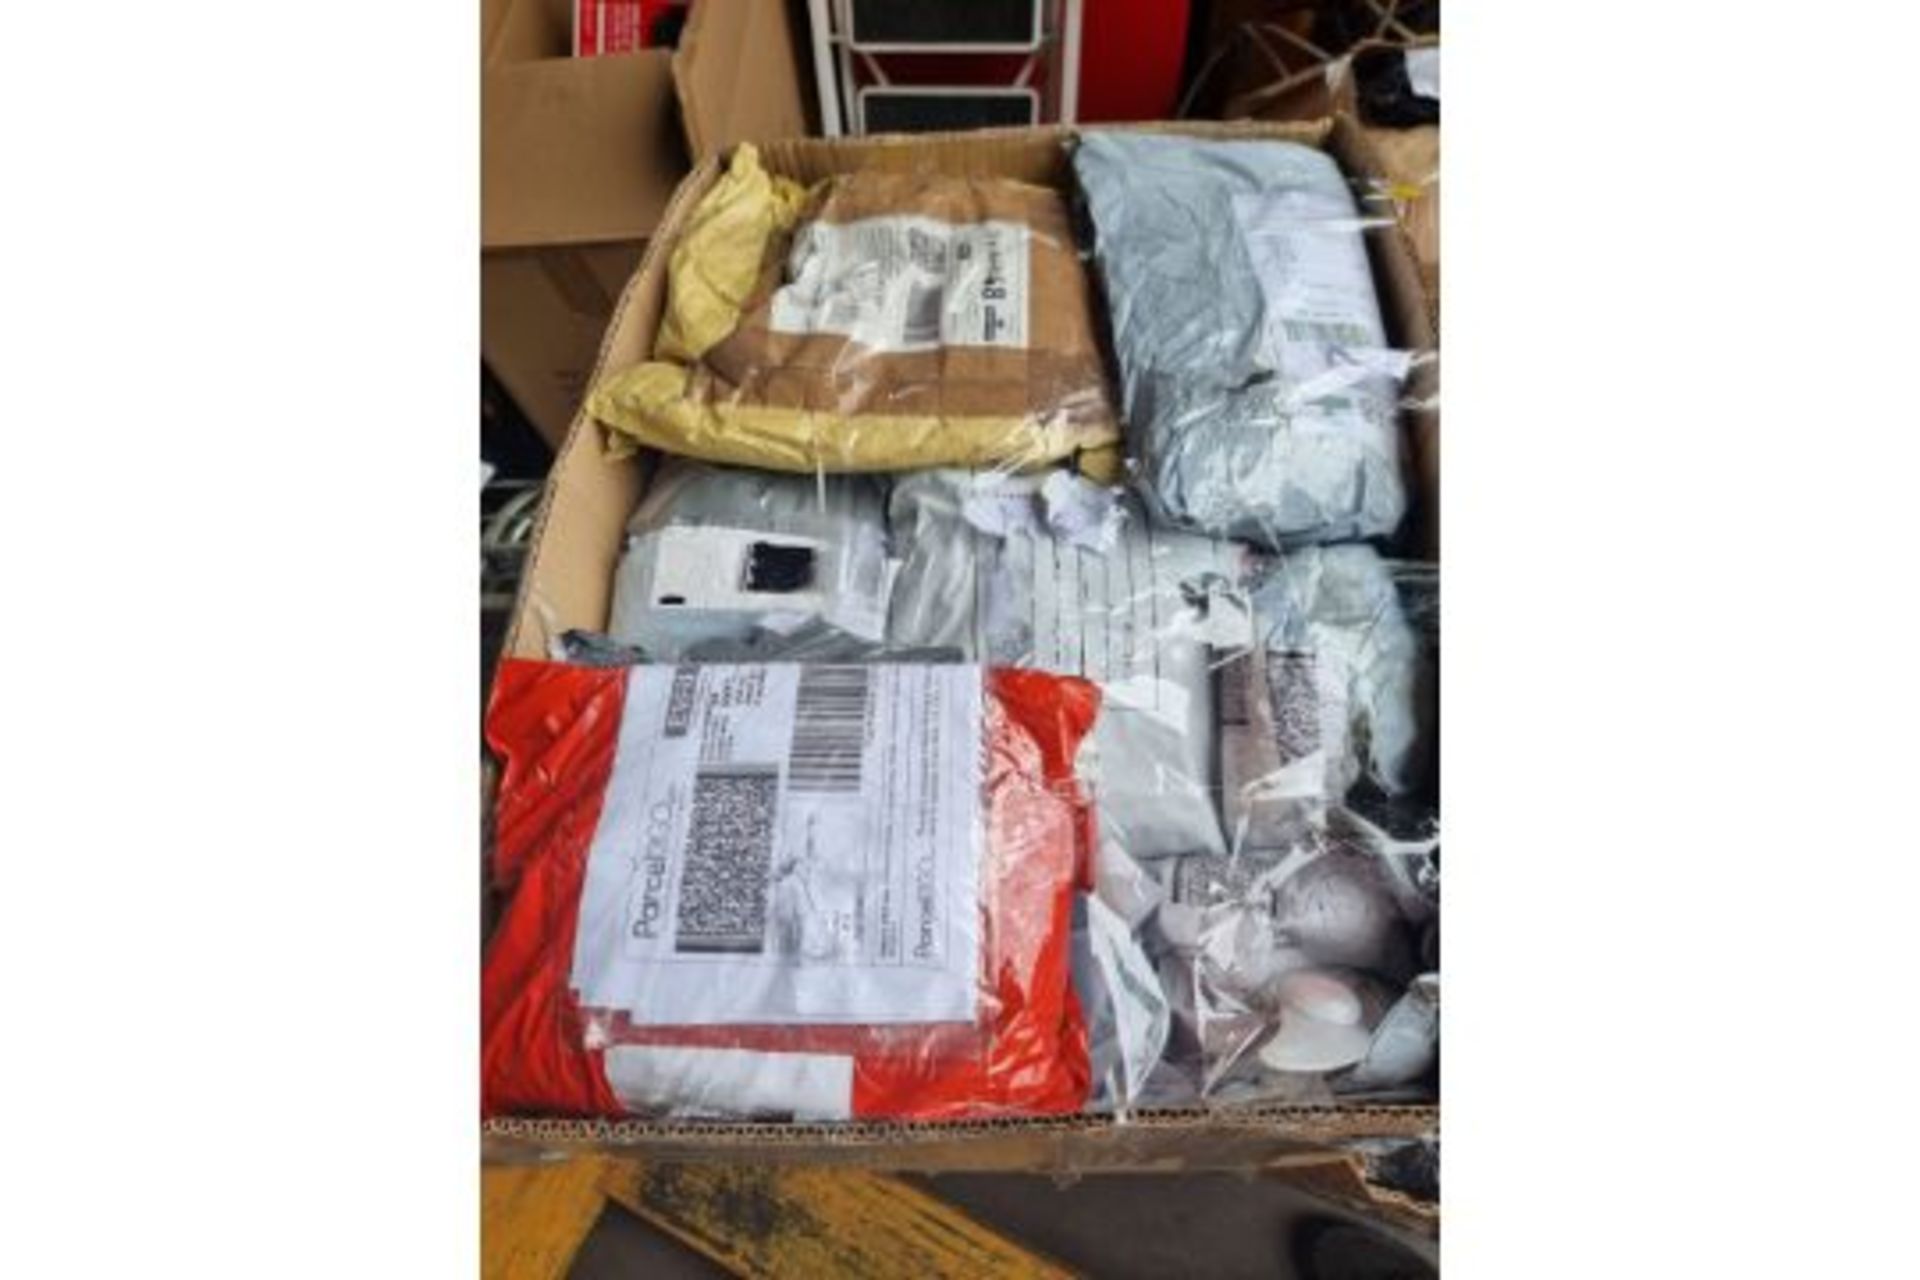 MEGA BULK LOT TO CONTAIN 500 x UNCHECKED COURIER/INTERNET RETURNS. CONDITION & ITEMS UNKNOWN.